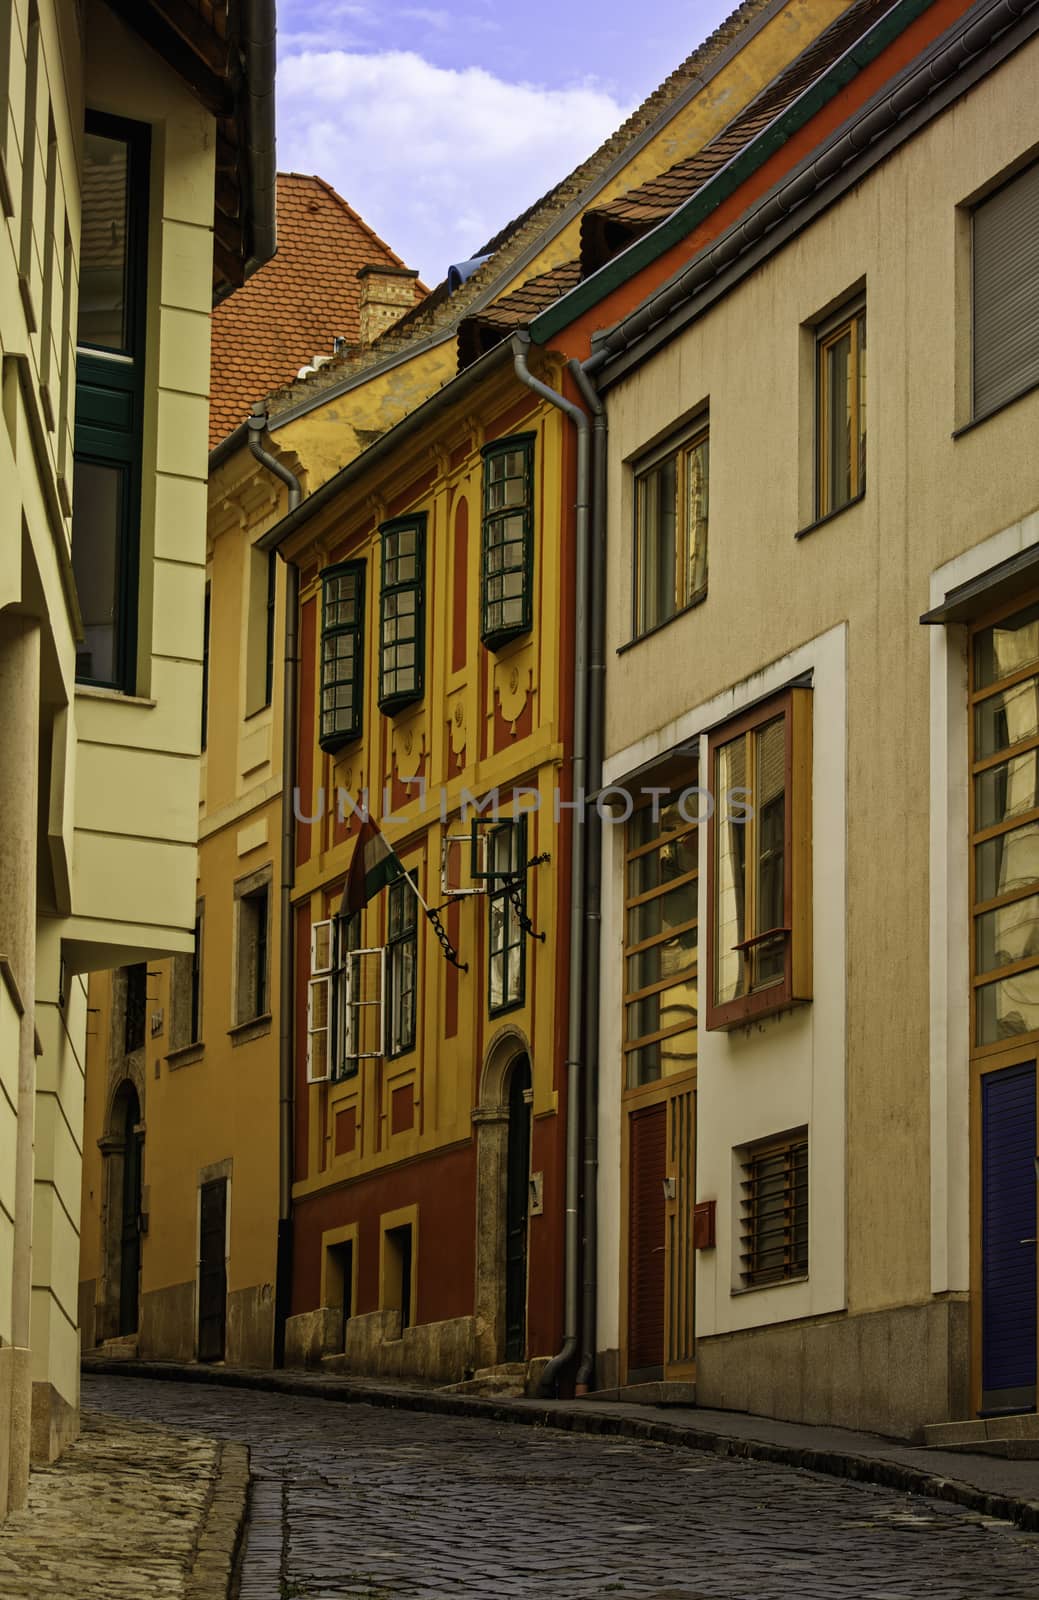 Narrow street with colorful old town houses by Mendelex